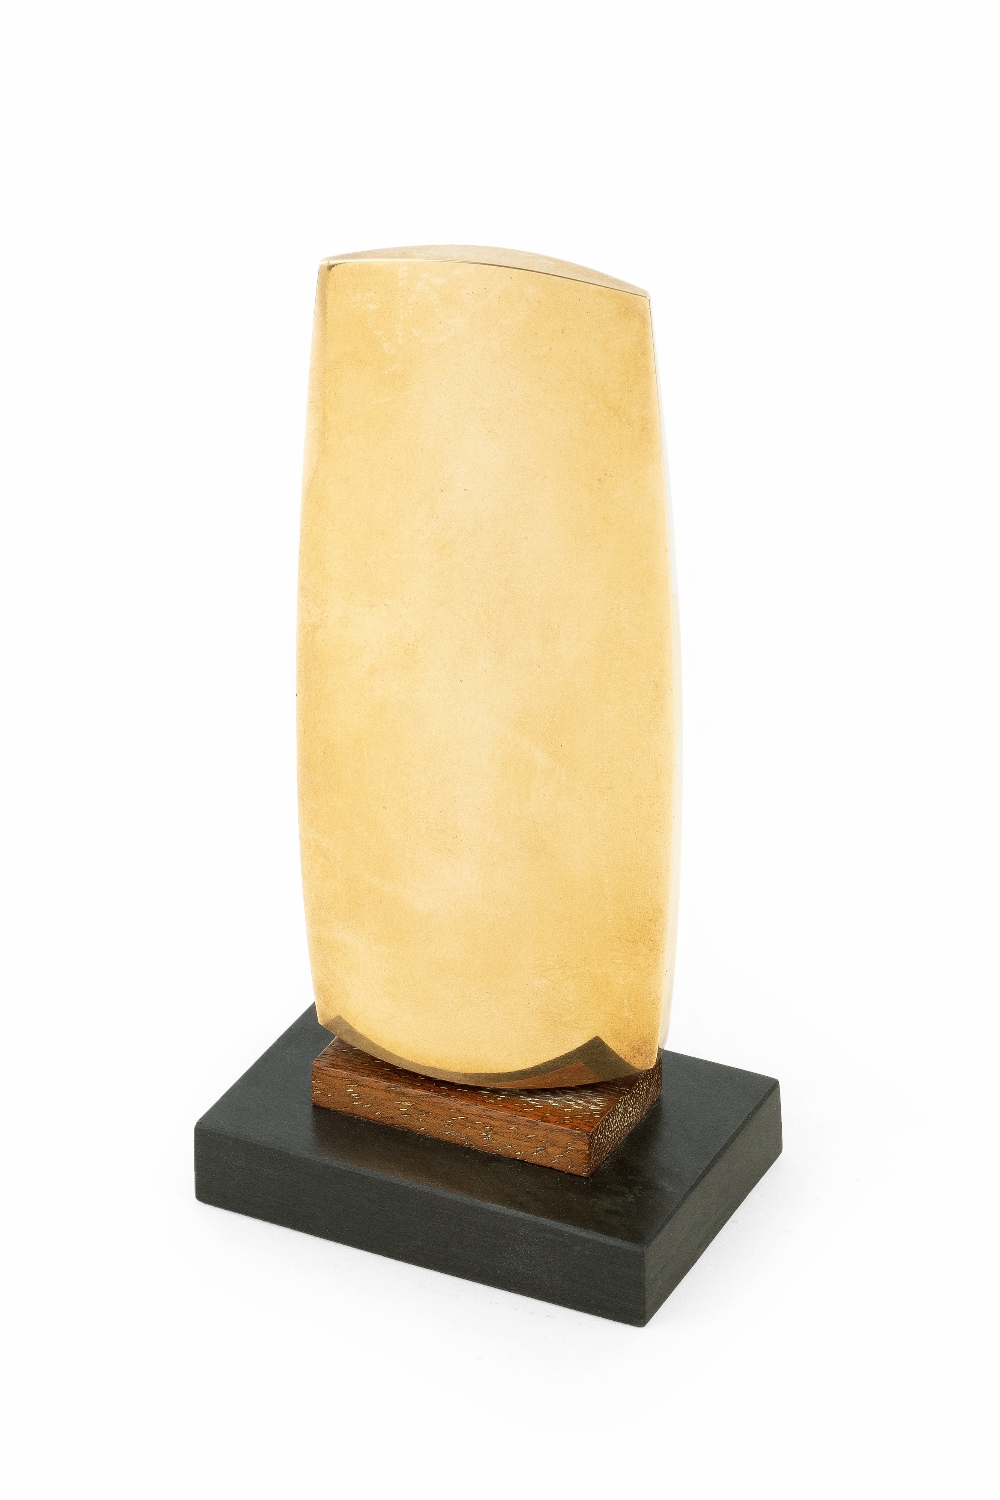 Denis Mitchell (1912-1993) Veor, 1987 5/7, signed, titled and numbered polished bronze 14.5cm high. - Image 3 of 5